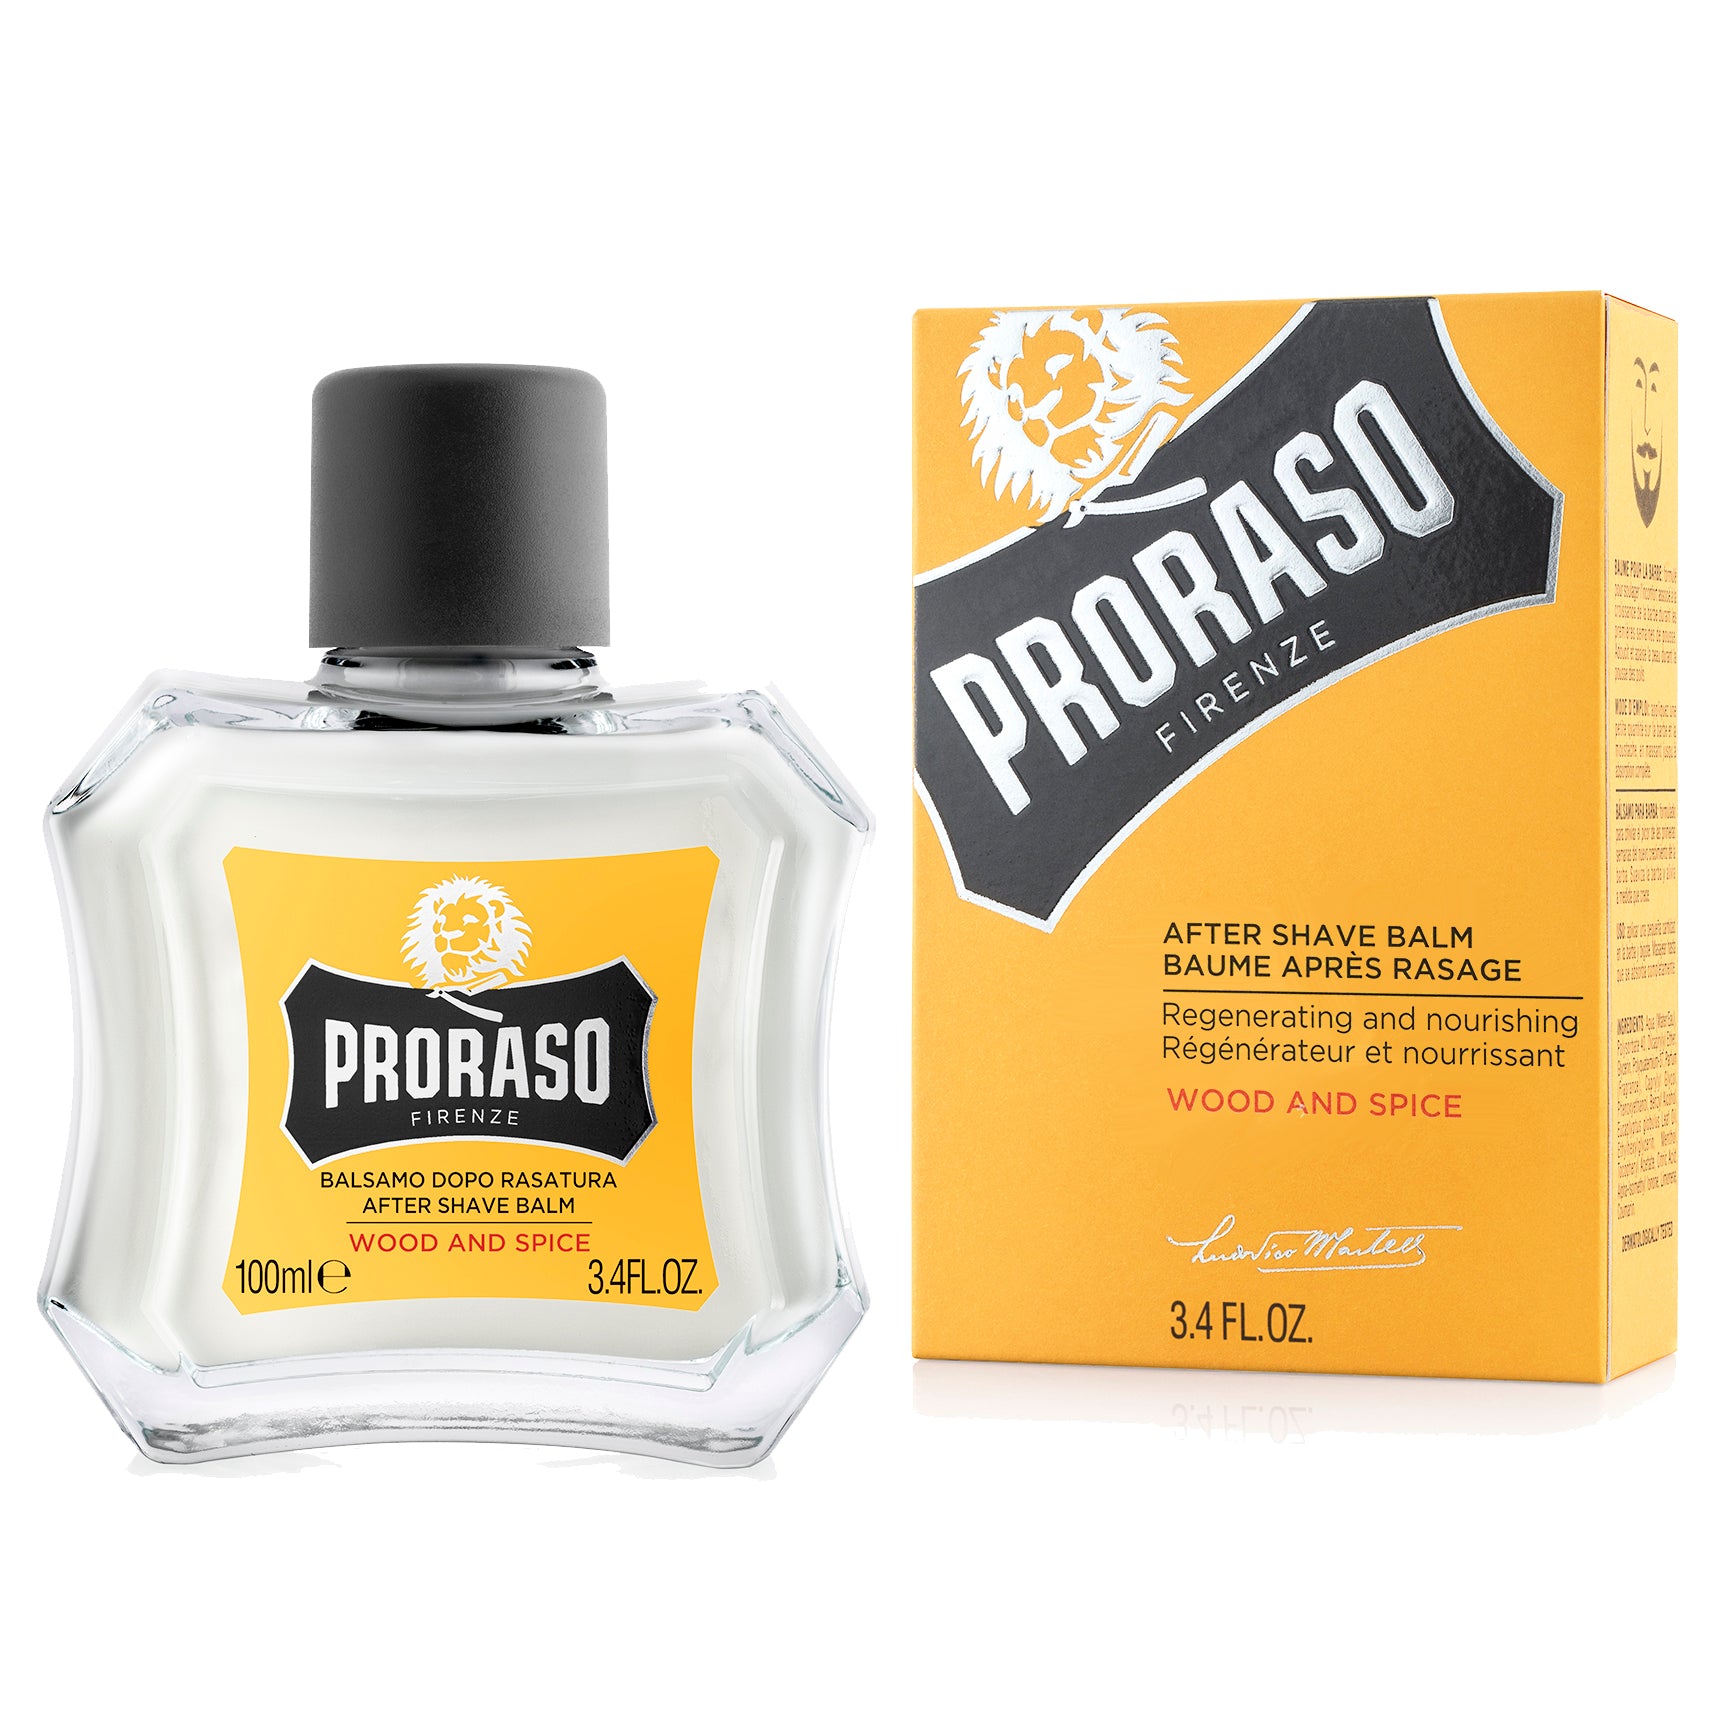 Proraso After Shave Balm WOOD & SPICE (100ml)